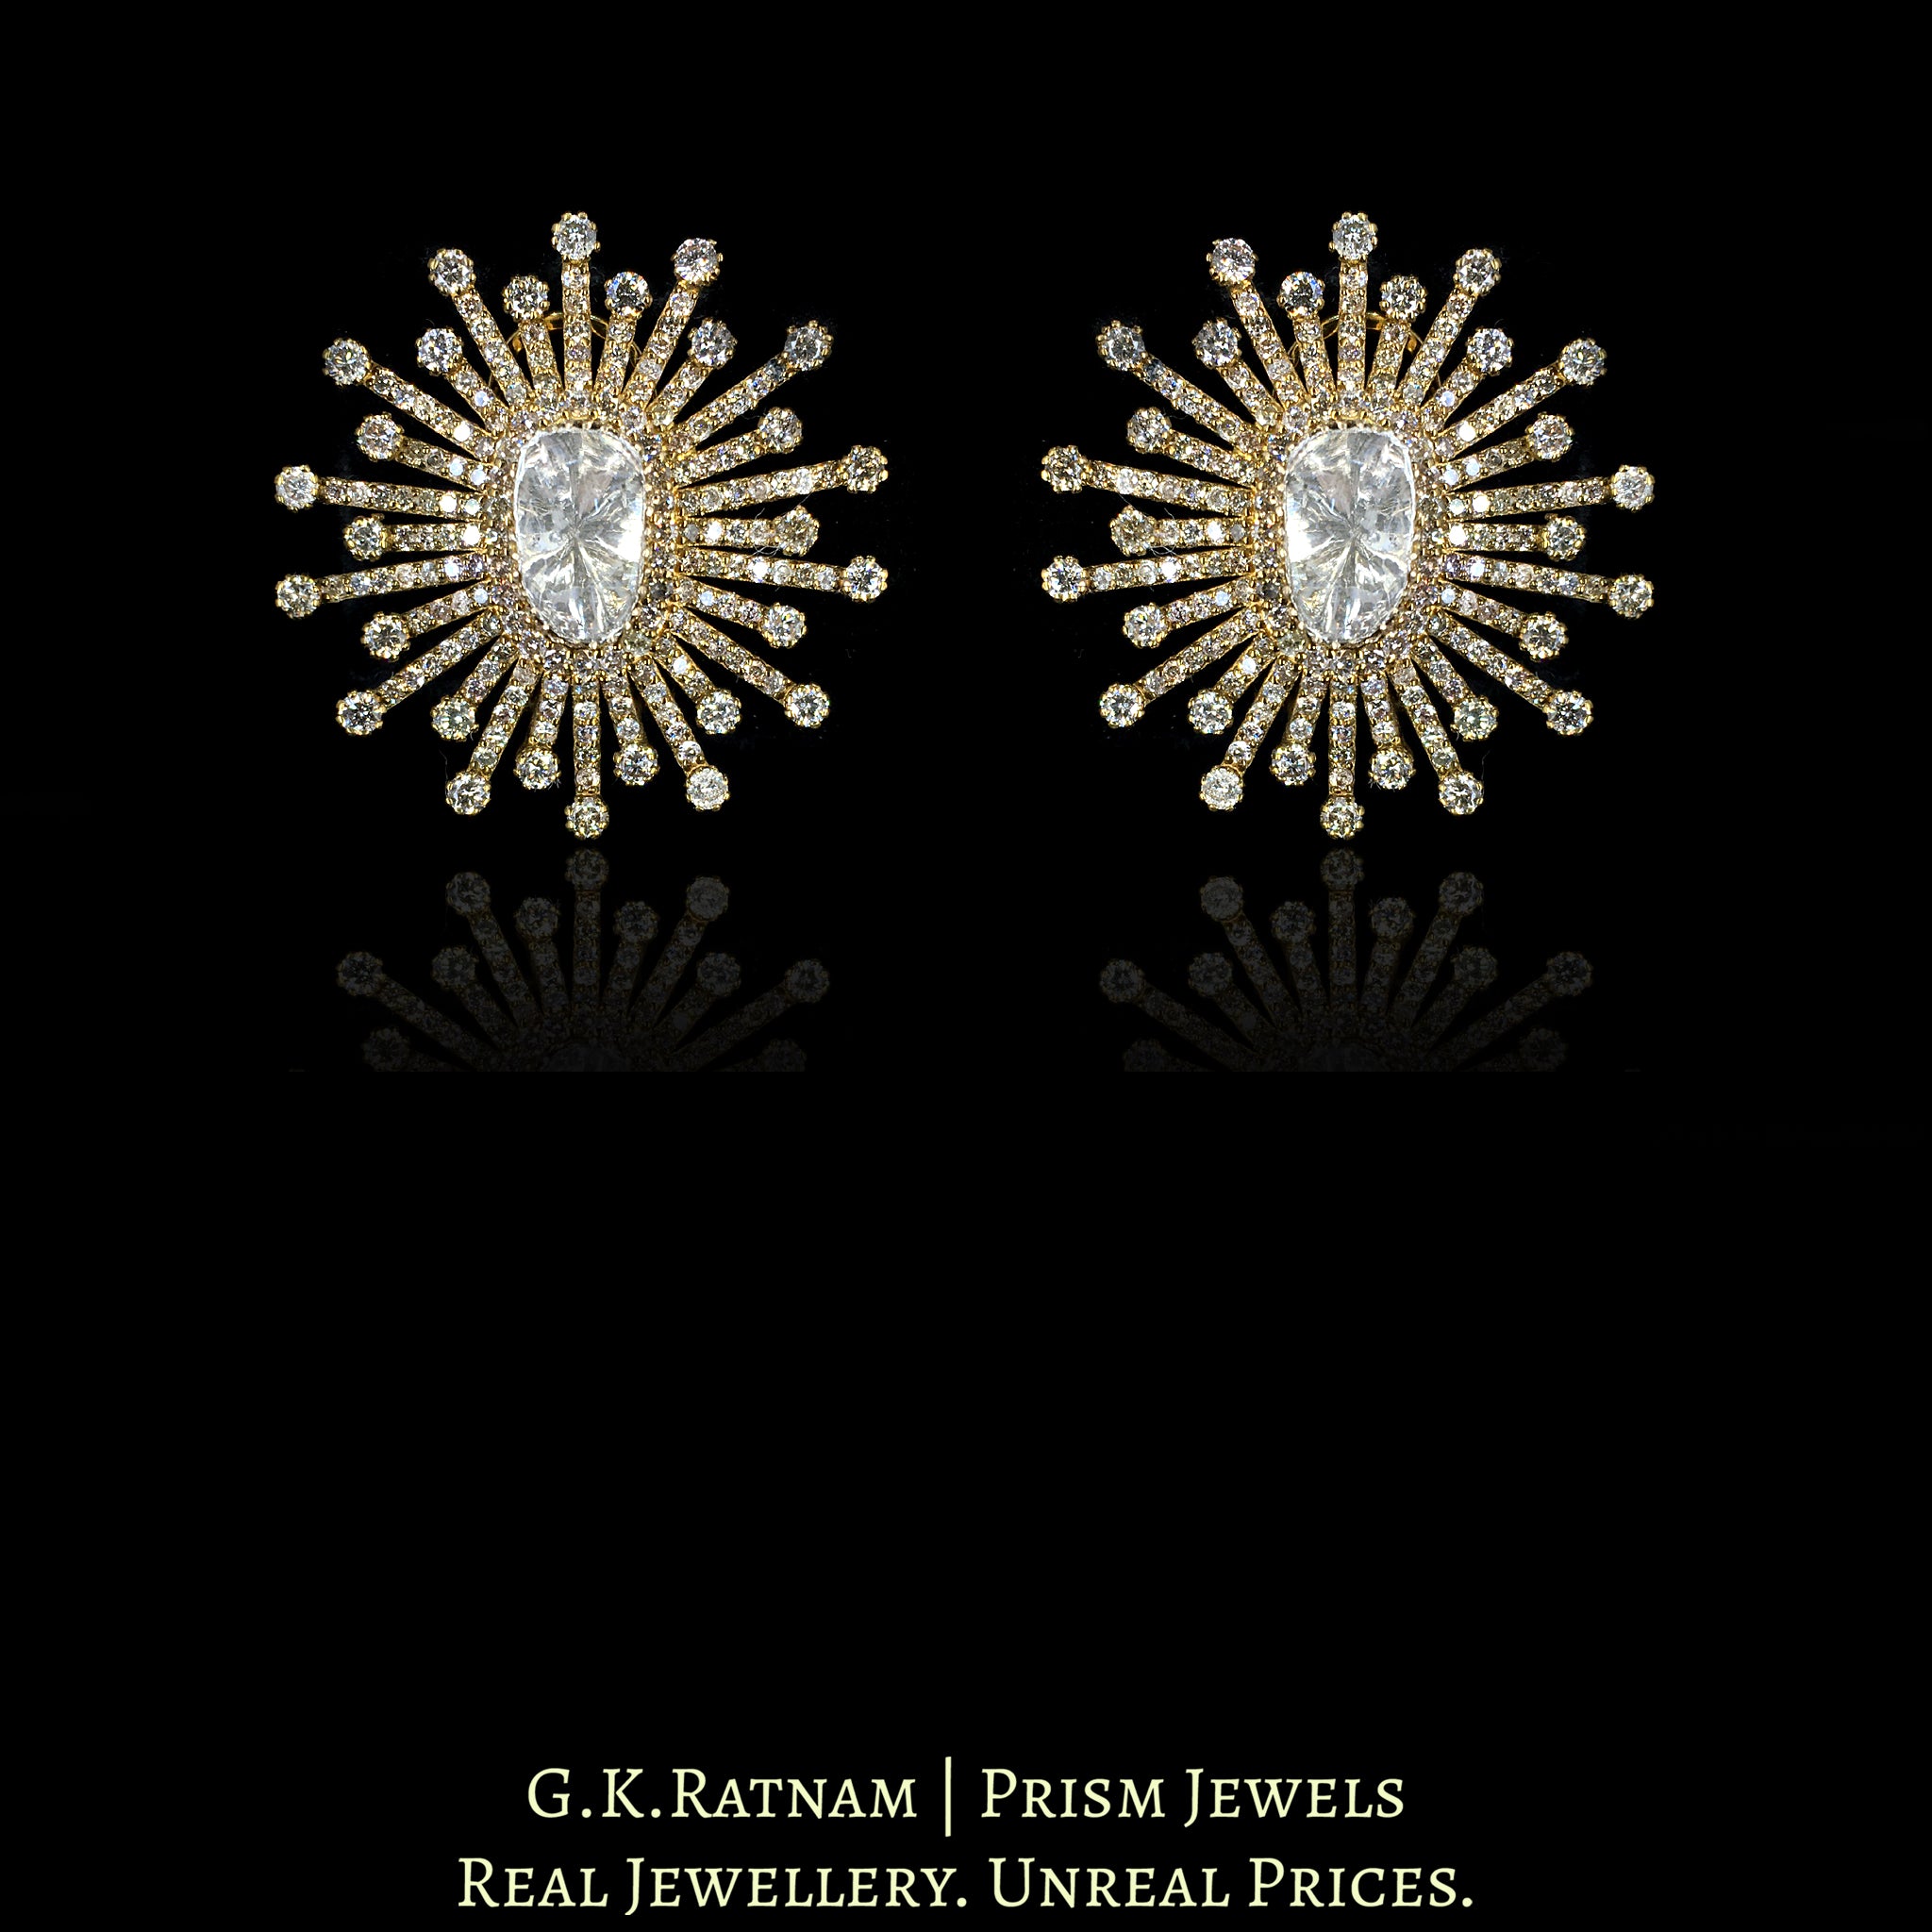 14k Gold and Diamond Polki Open Setting floral Karnfool Earring Pair in Antique Victorian Finish